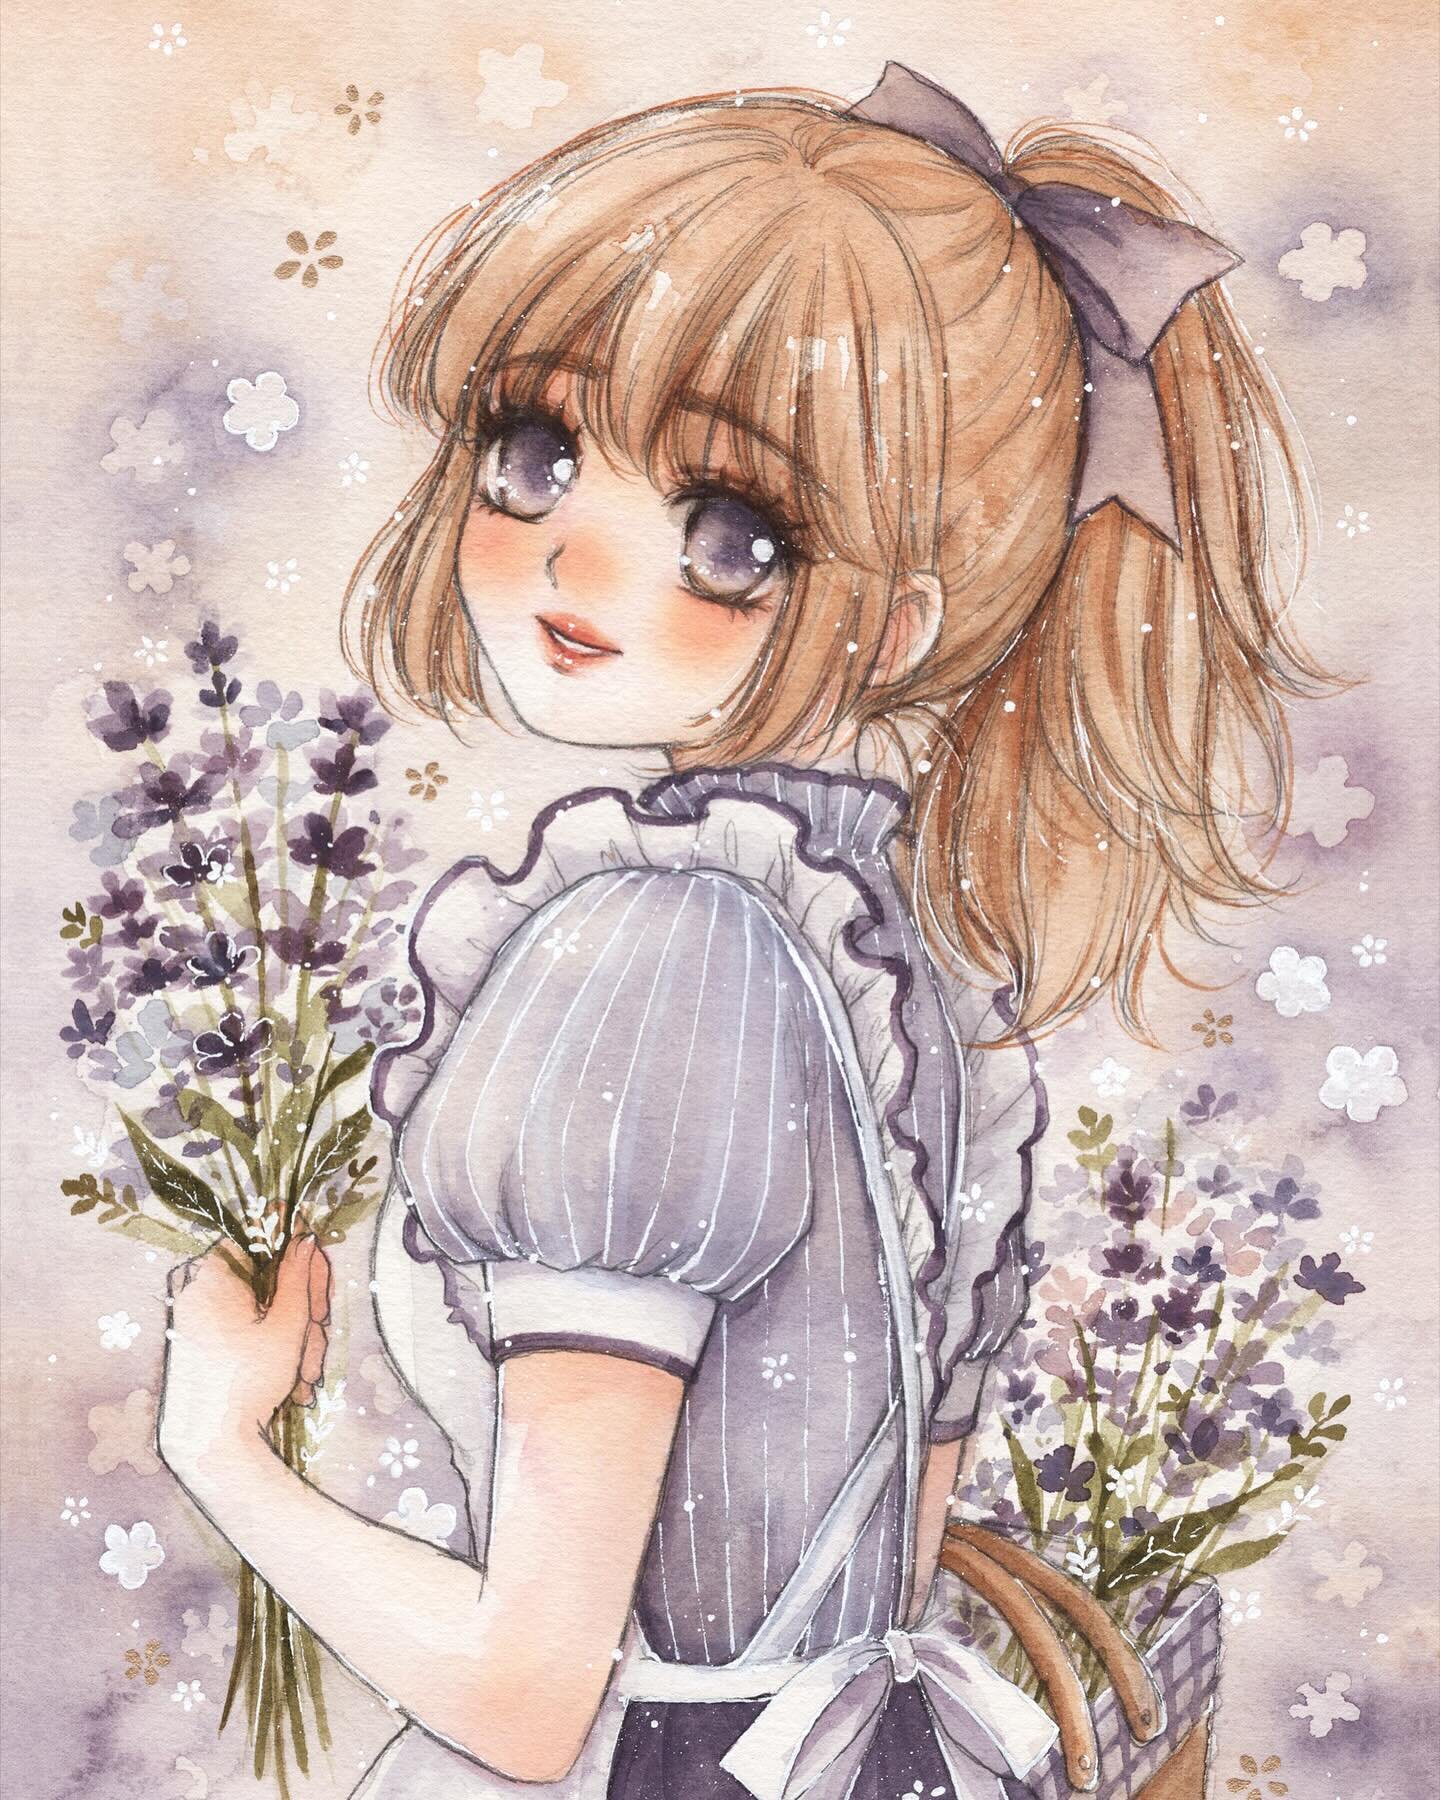 Lavender 💜
Flower series IV

-
February&rsquo;s happy mail theme ✶ You can sign up for the happy mail on Patreon before the month of February ends to receive this set! 💌 (Monthly wallpapers, high res + lineart files are also available there ♡)

Too